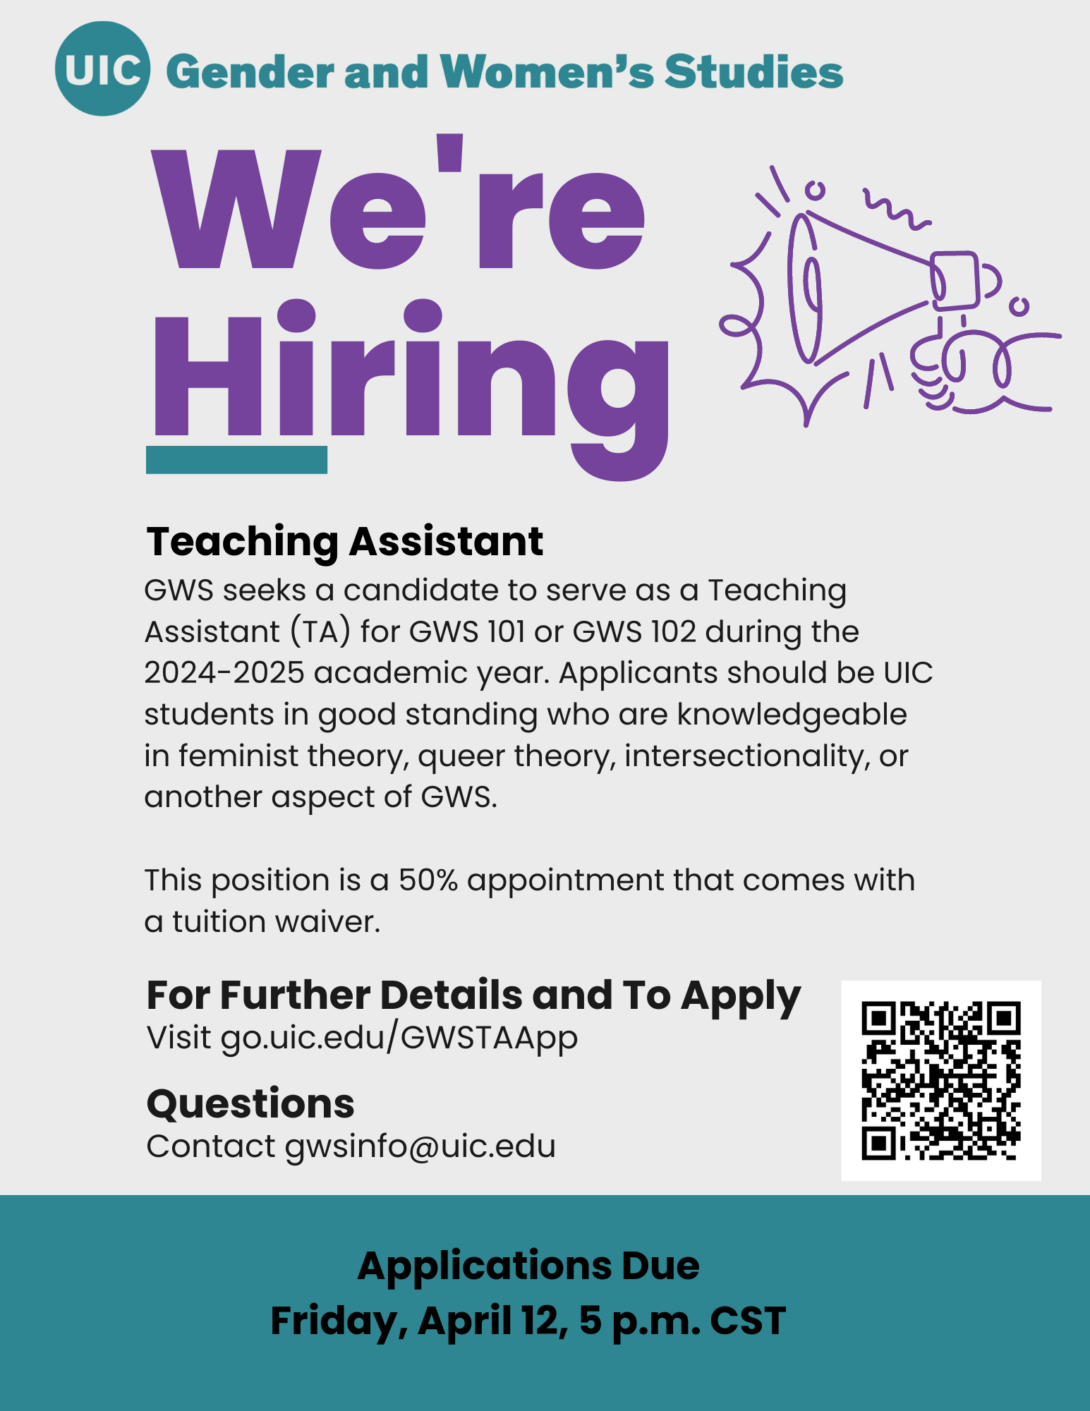 A light gray flyer with a teal border at the bottom announces GWS's hiring of Teaching Assistants in purple and black text. The GWS logo appears in teal across the top of the flyer. A drawing of a hand holding a megaphone in purple appears in the top right, next to big bold purple text that states We're Hiring.